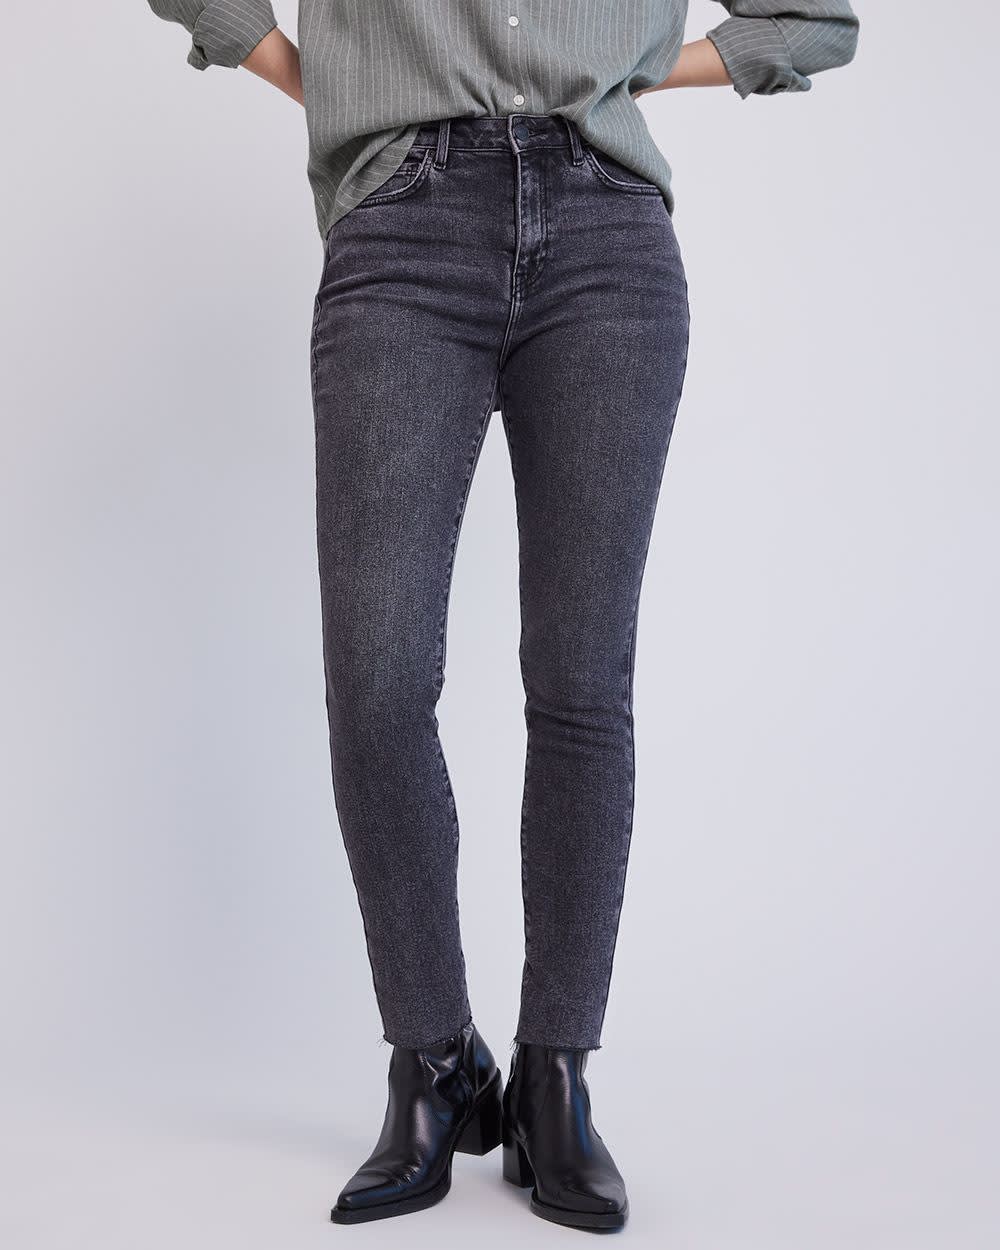 The Dream Jean Curvy High-Waisted Jegging  Curvy jeans, Jeans outfit  casual, Women jeans